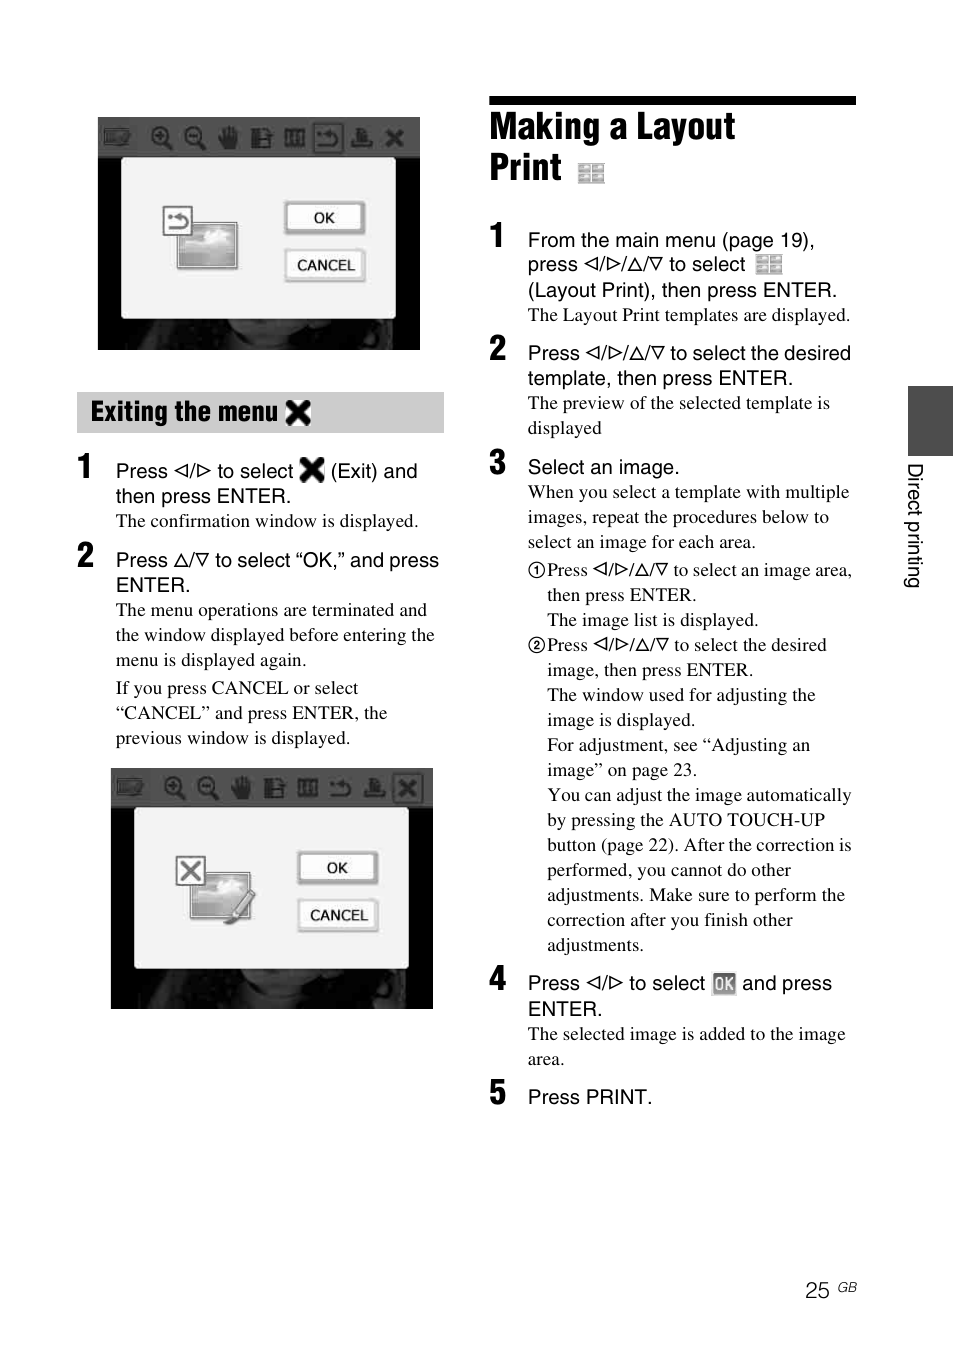 Exiting the menu, Making a layout print | Sony DPP-FP77 User Manual | Page 25 / 72